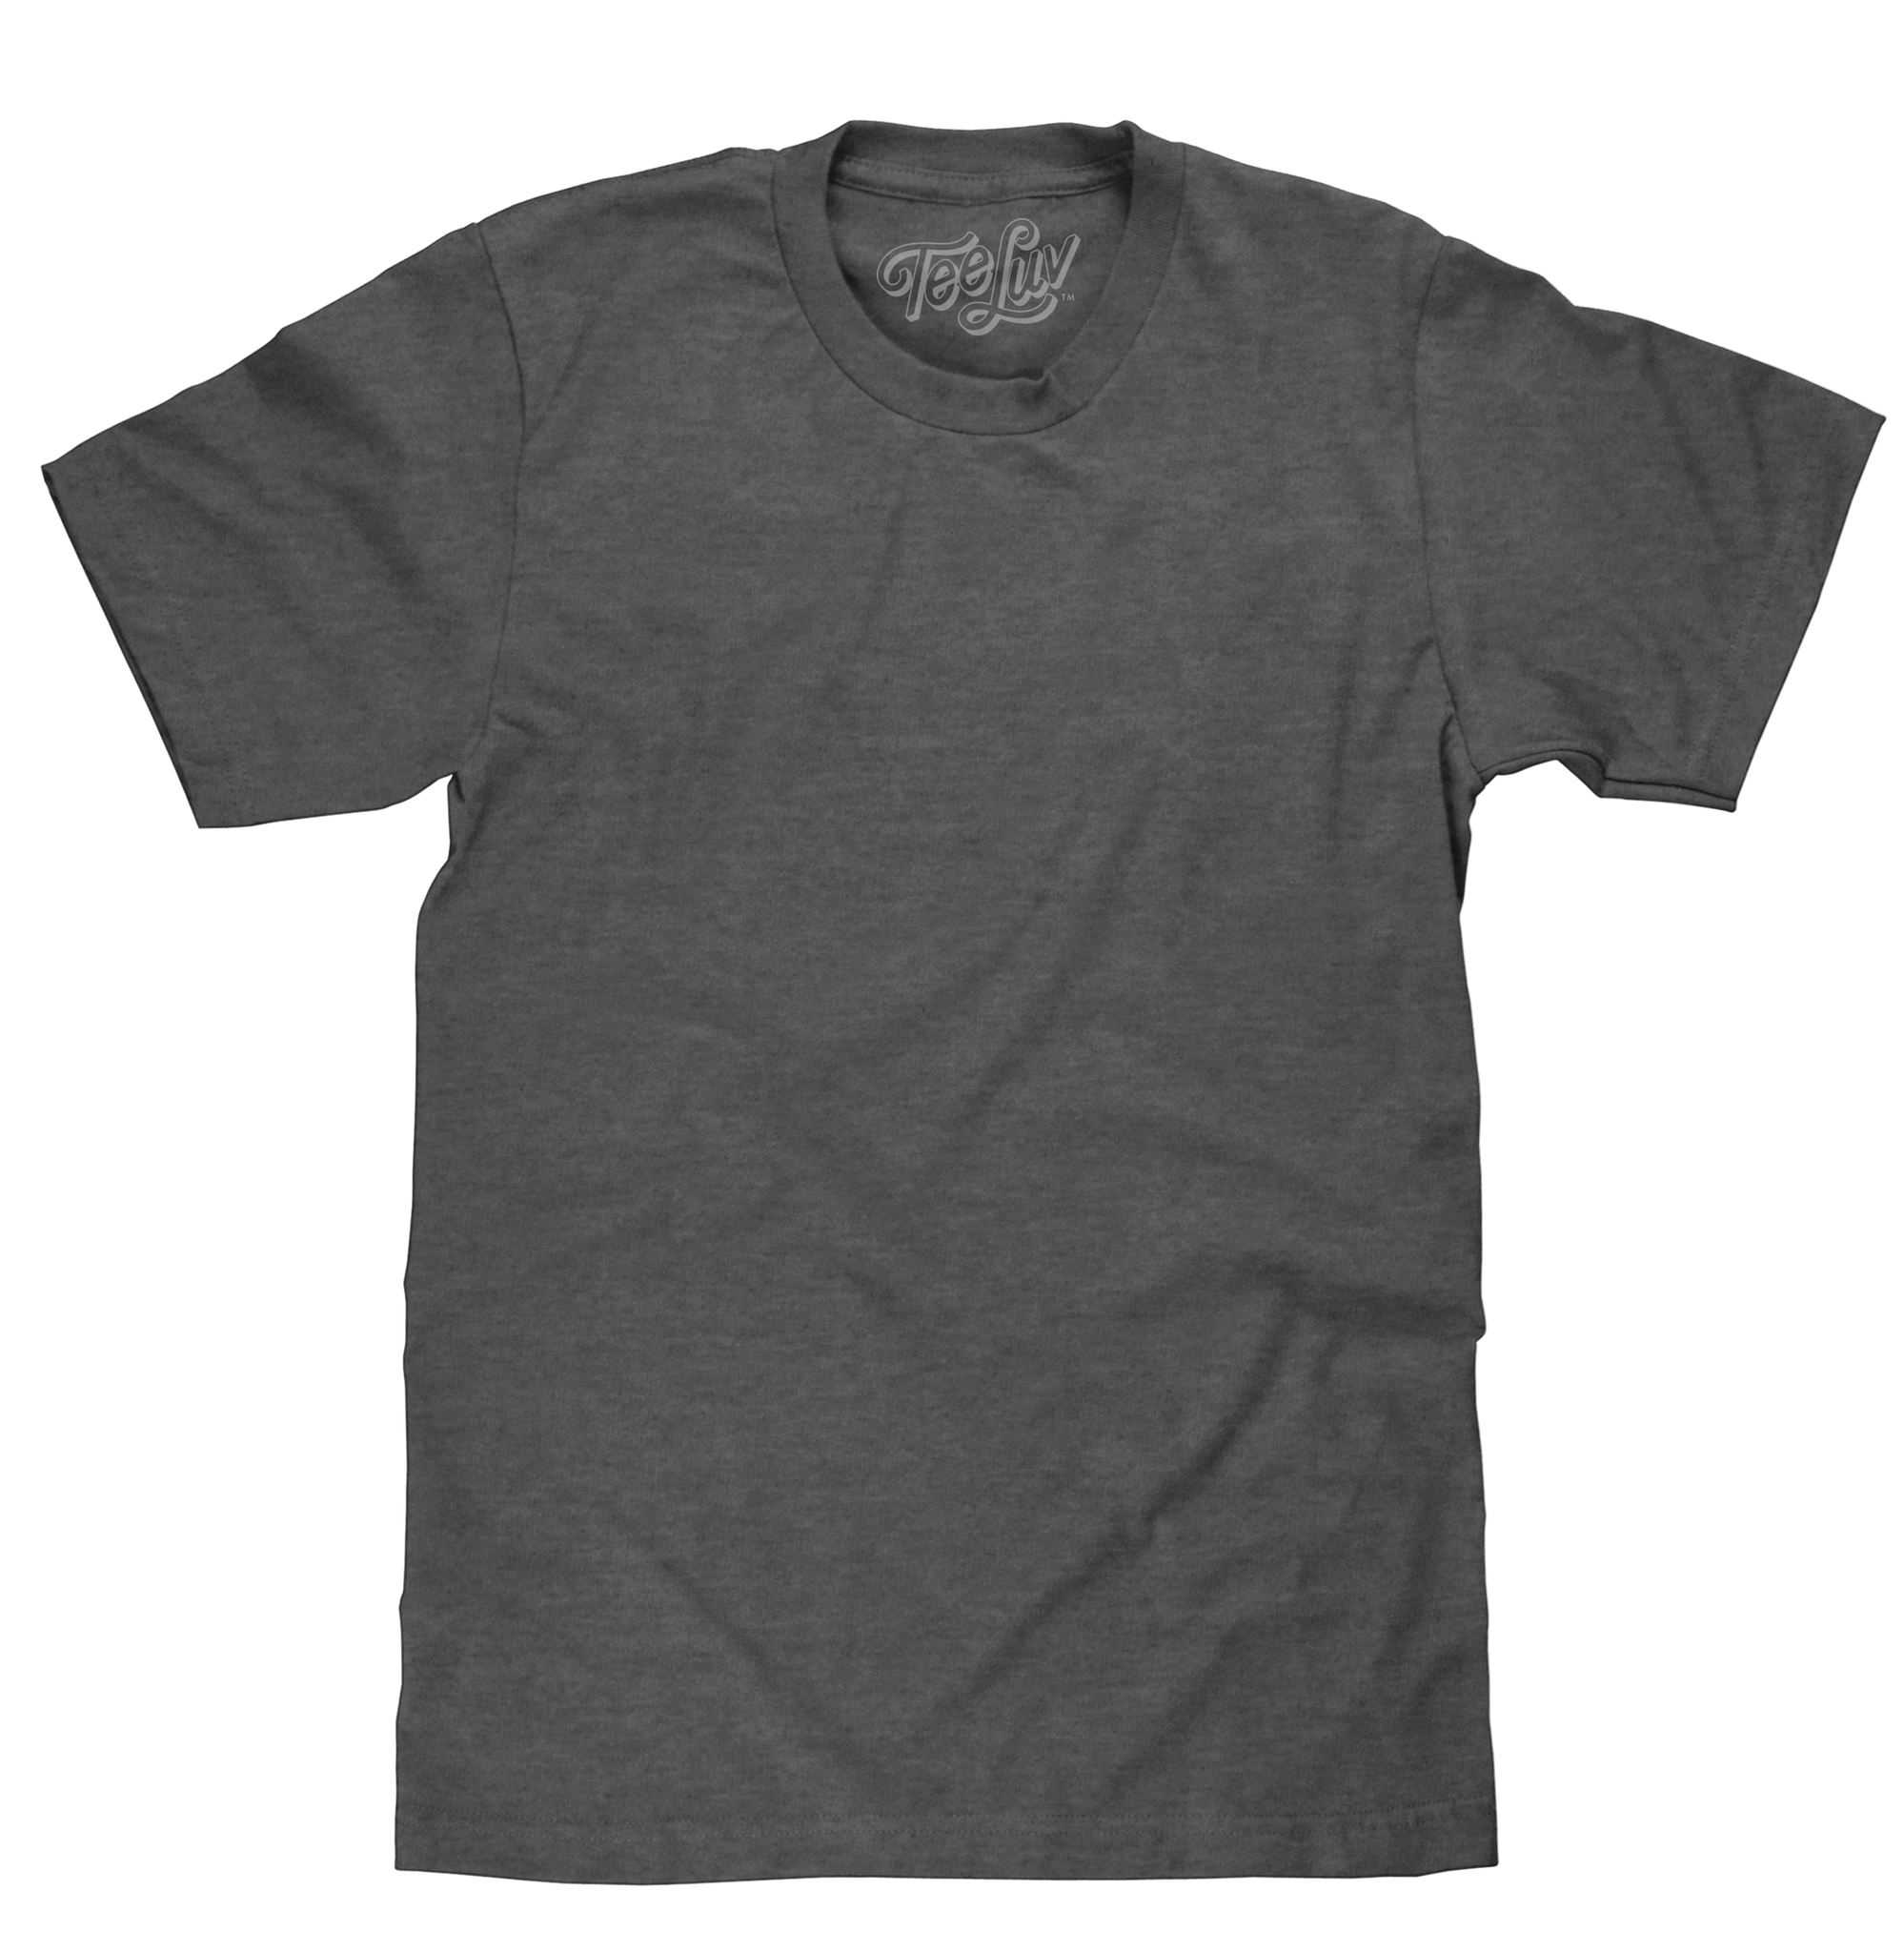 plain gray t shirt front and back